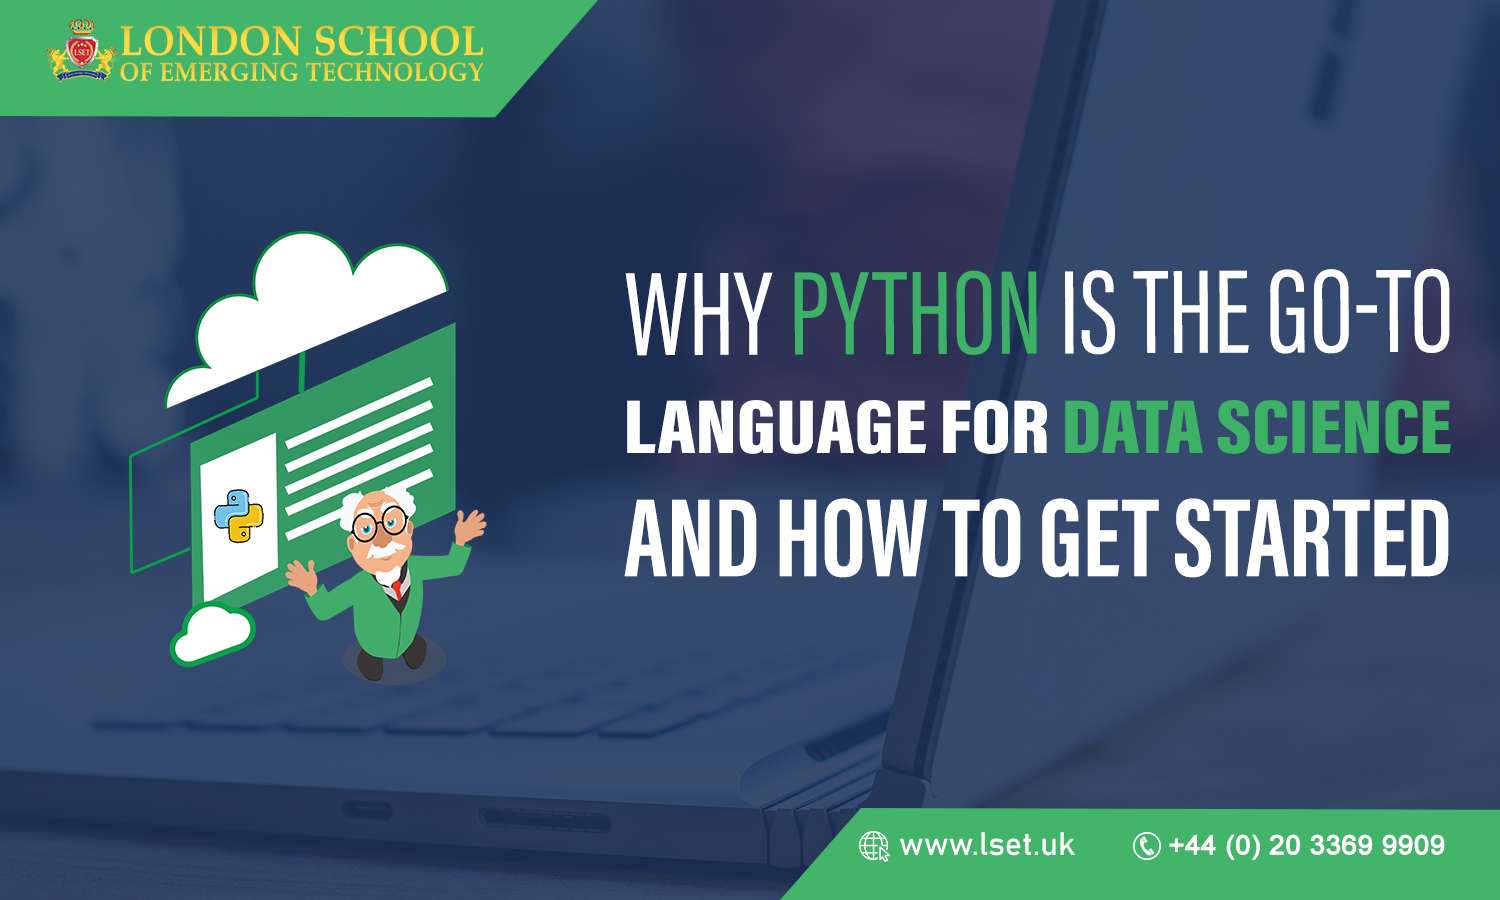 Why Python Is the Go-To Language for Data Science and How to Get Started